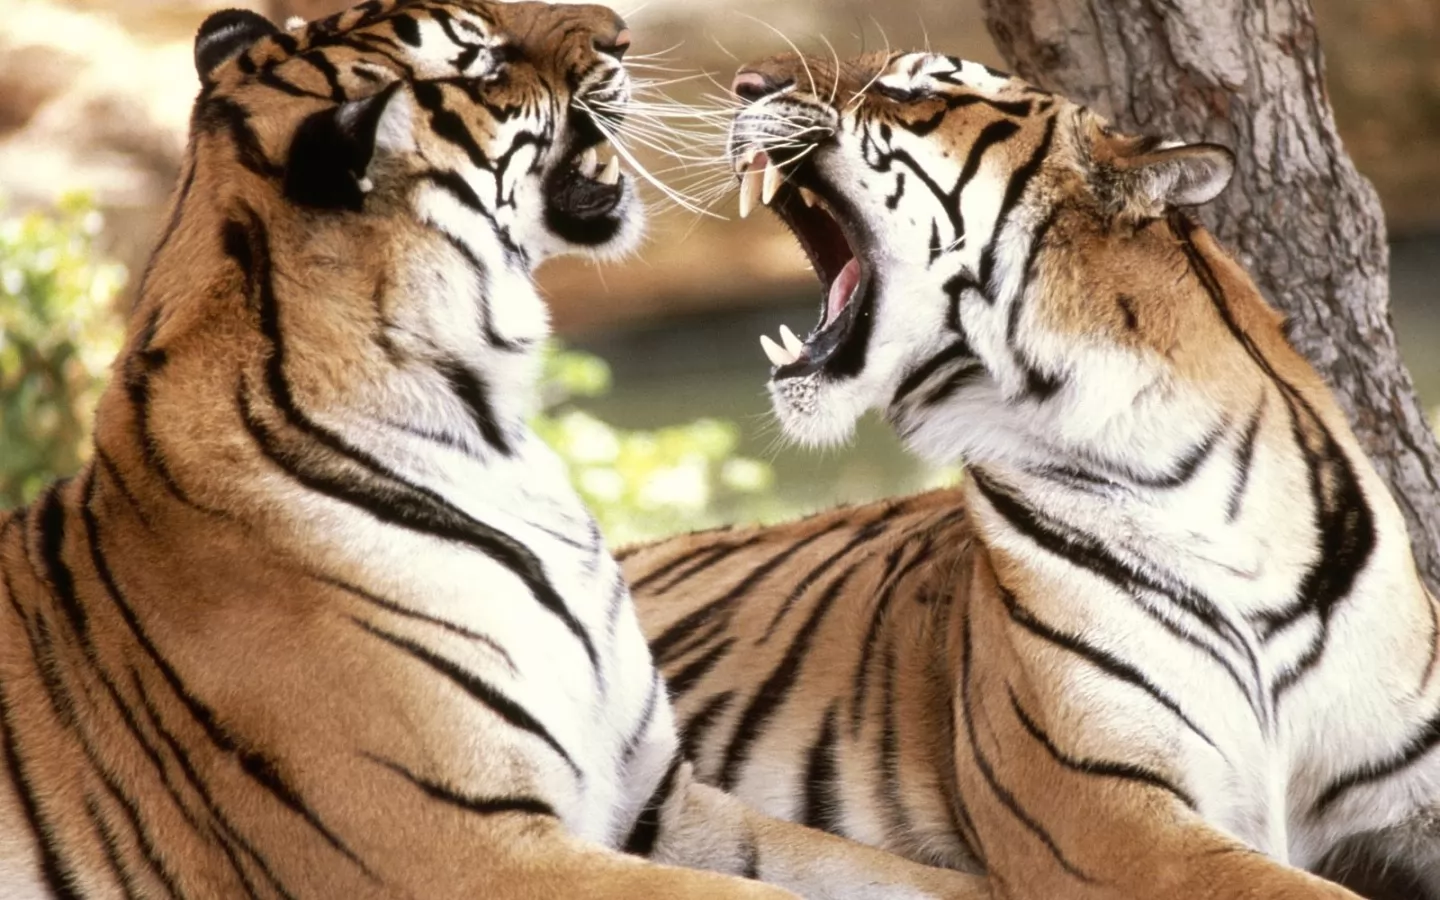 Almost fight, animals, cats, enamoured, tigers x